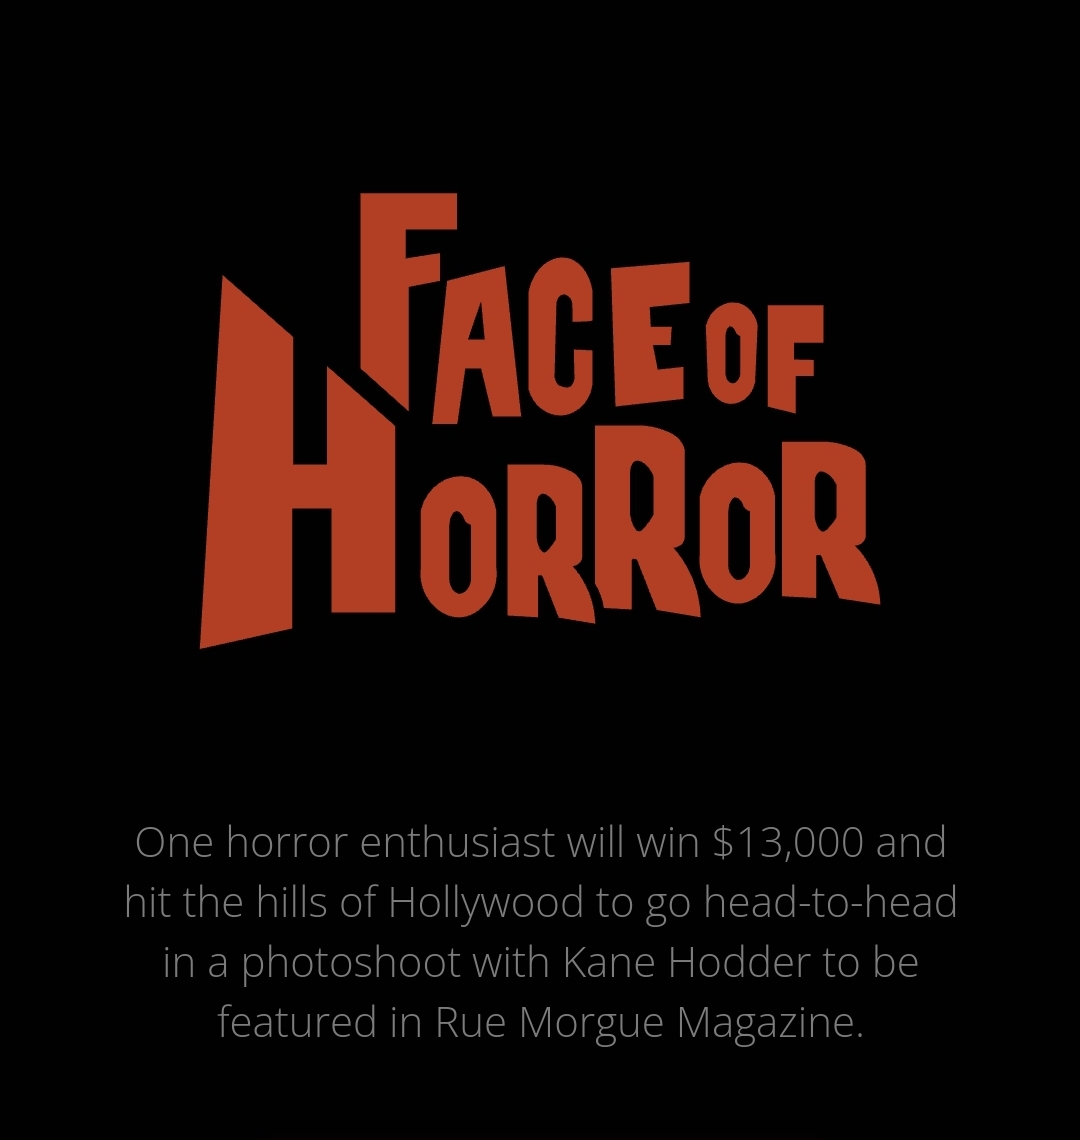 Voting is now open for the #faceofhorror Quarter Finals! 

Only those ranked #1 in their groups will advance. We have ten days to get and keep me there. Let's get it!

#halloween #ruemorgue #voteforme #peace #love #beauty